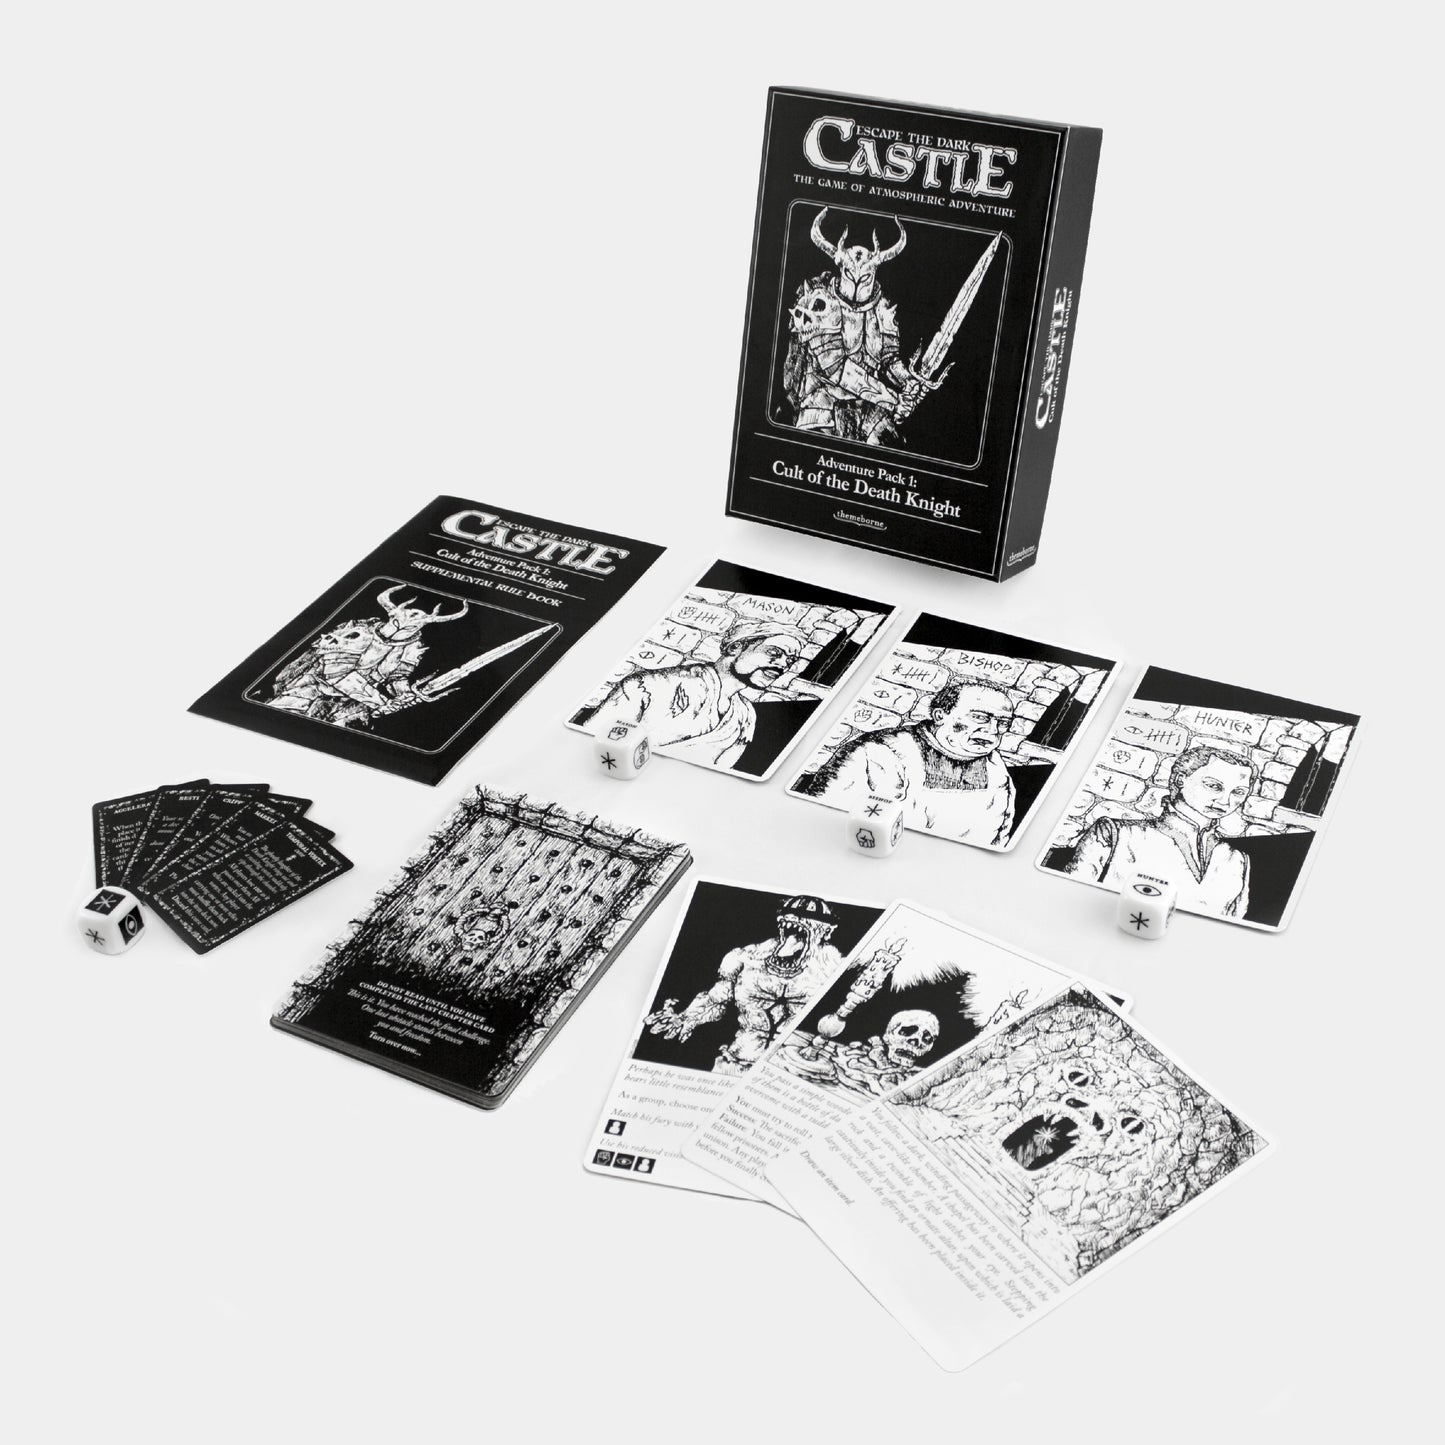 Adventure Pack 1: Cult of the Death Knight